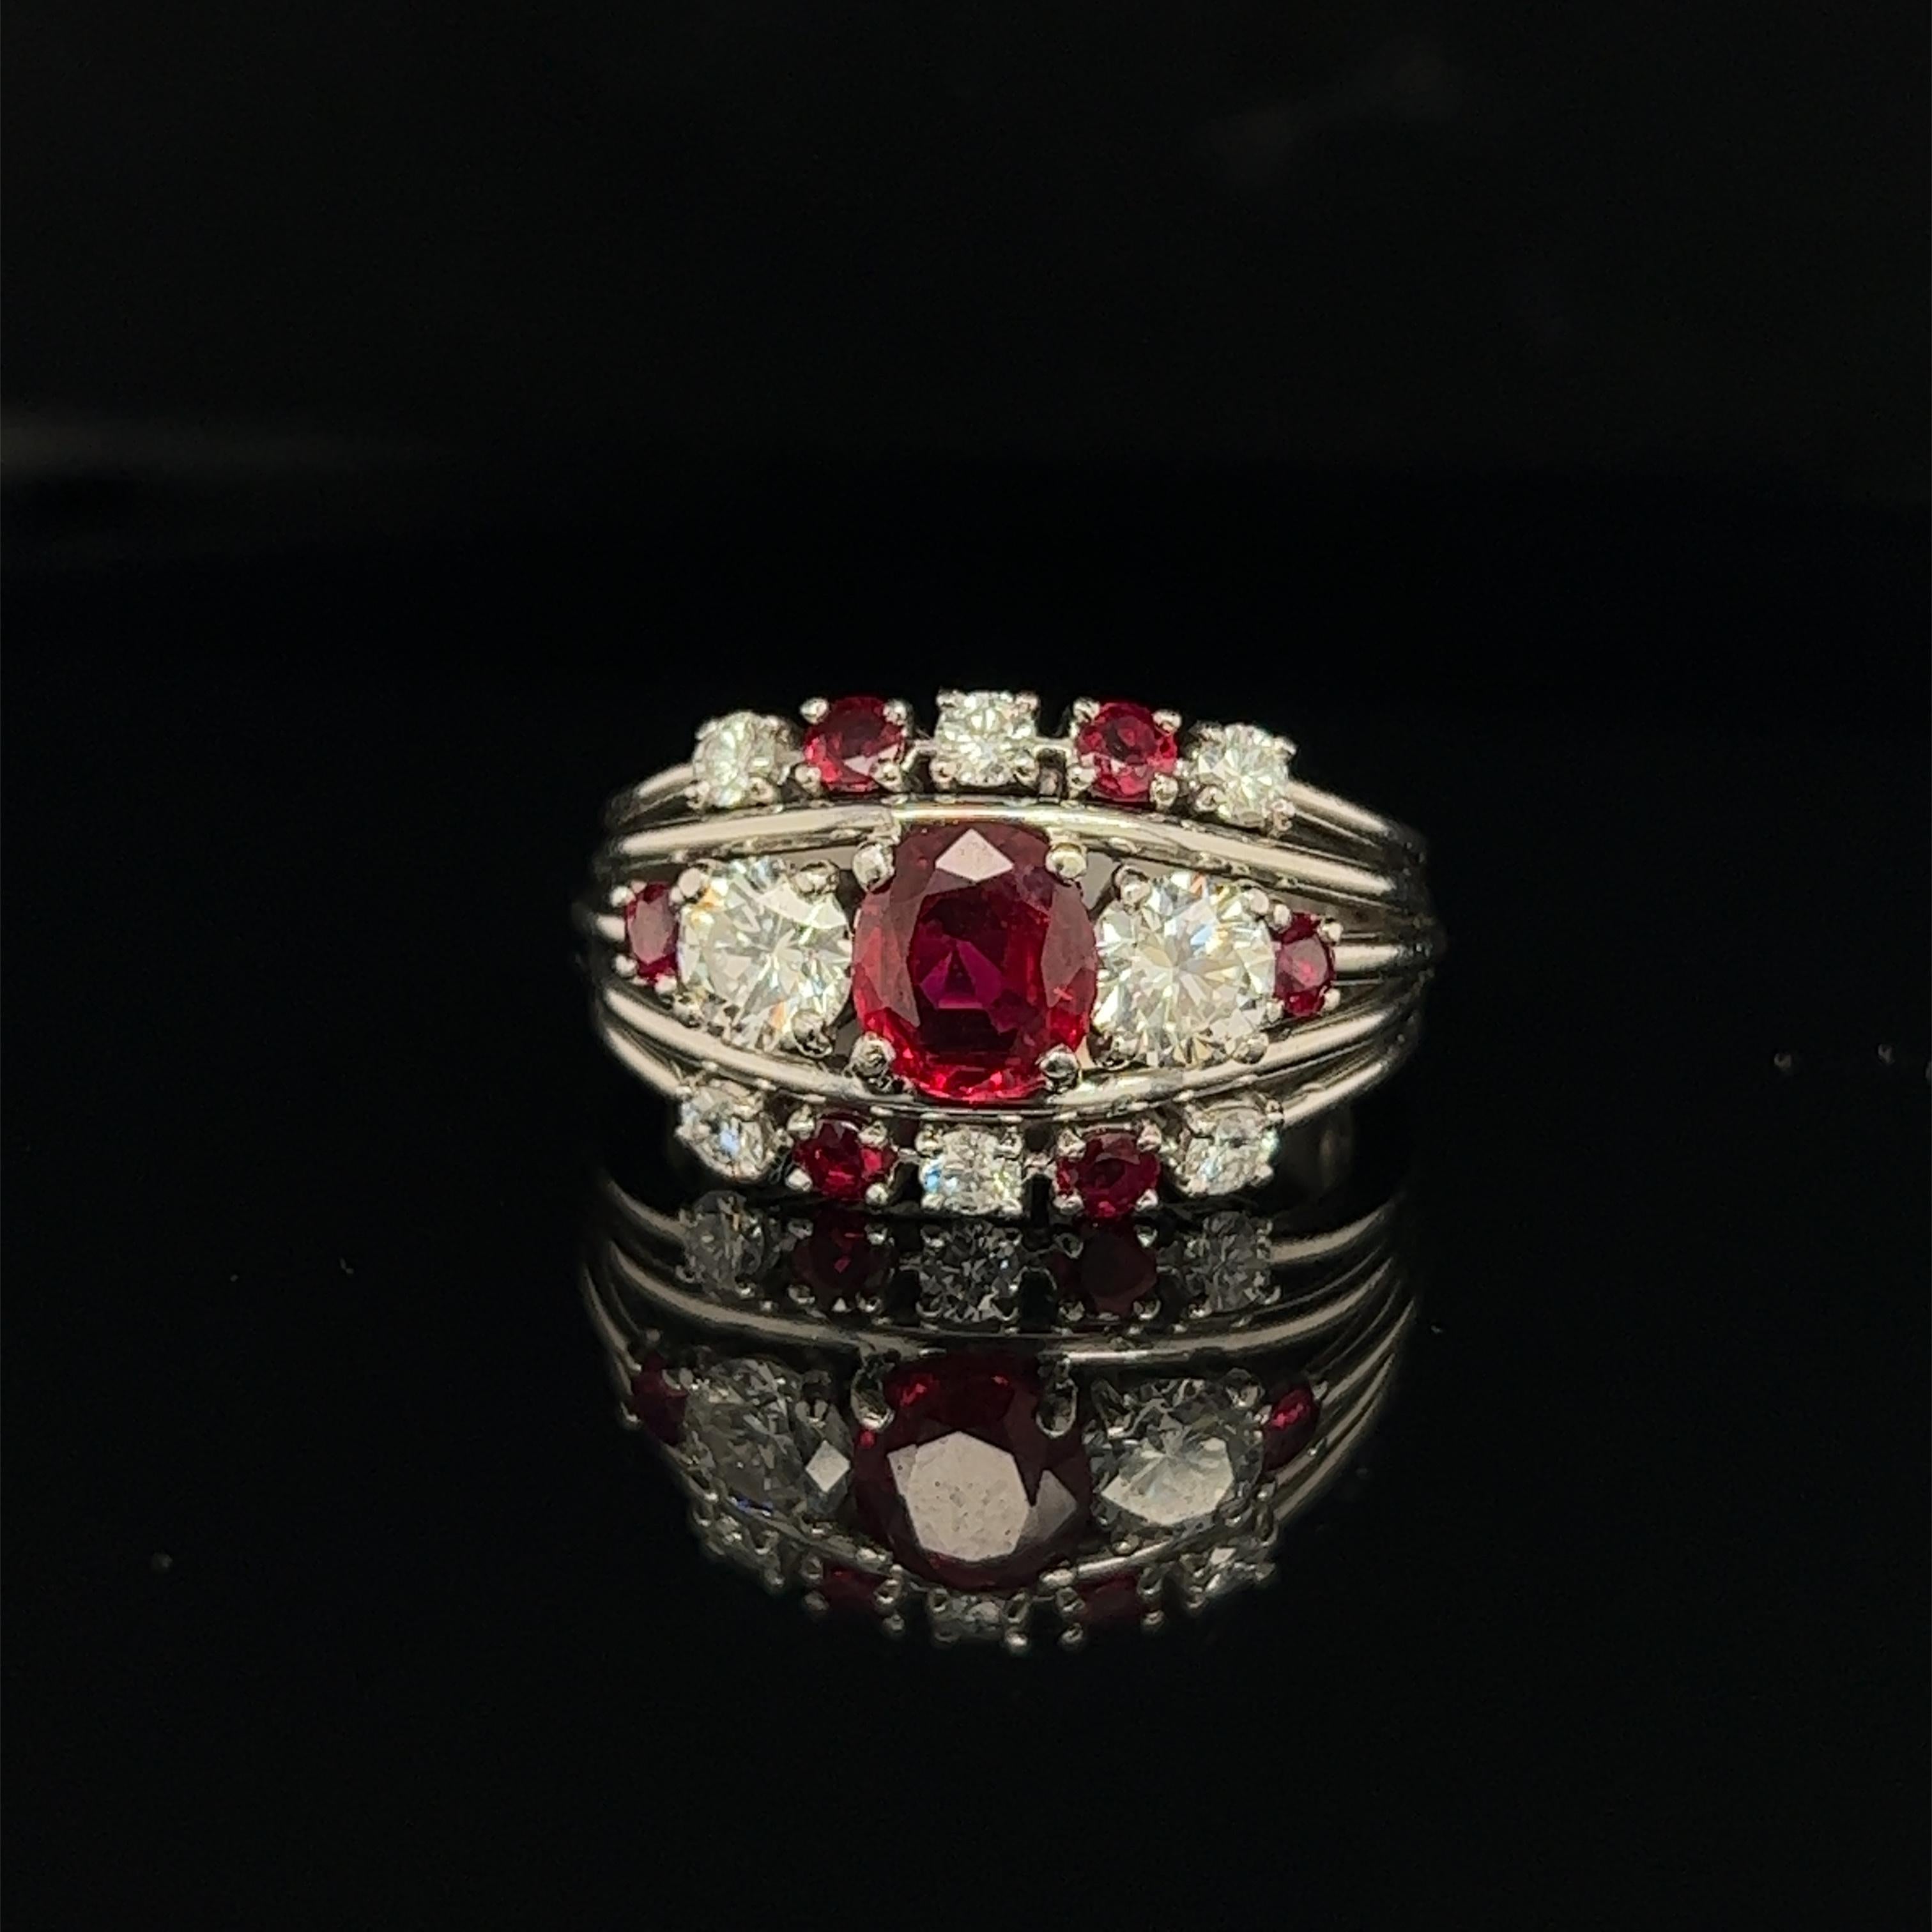 Beautiful ring from famed American designer Raymond Yard. The ring is crafted in platinum and highlights ruby and diamond gemstones. The center gemstone is one Burma no heat ruby  gemstone. Burmese rubies are distinguished by their pure red color